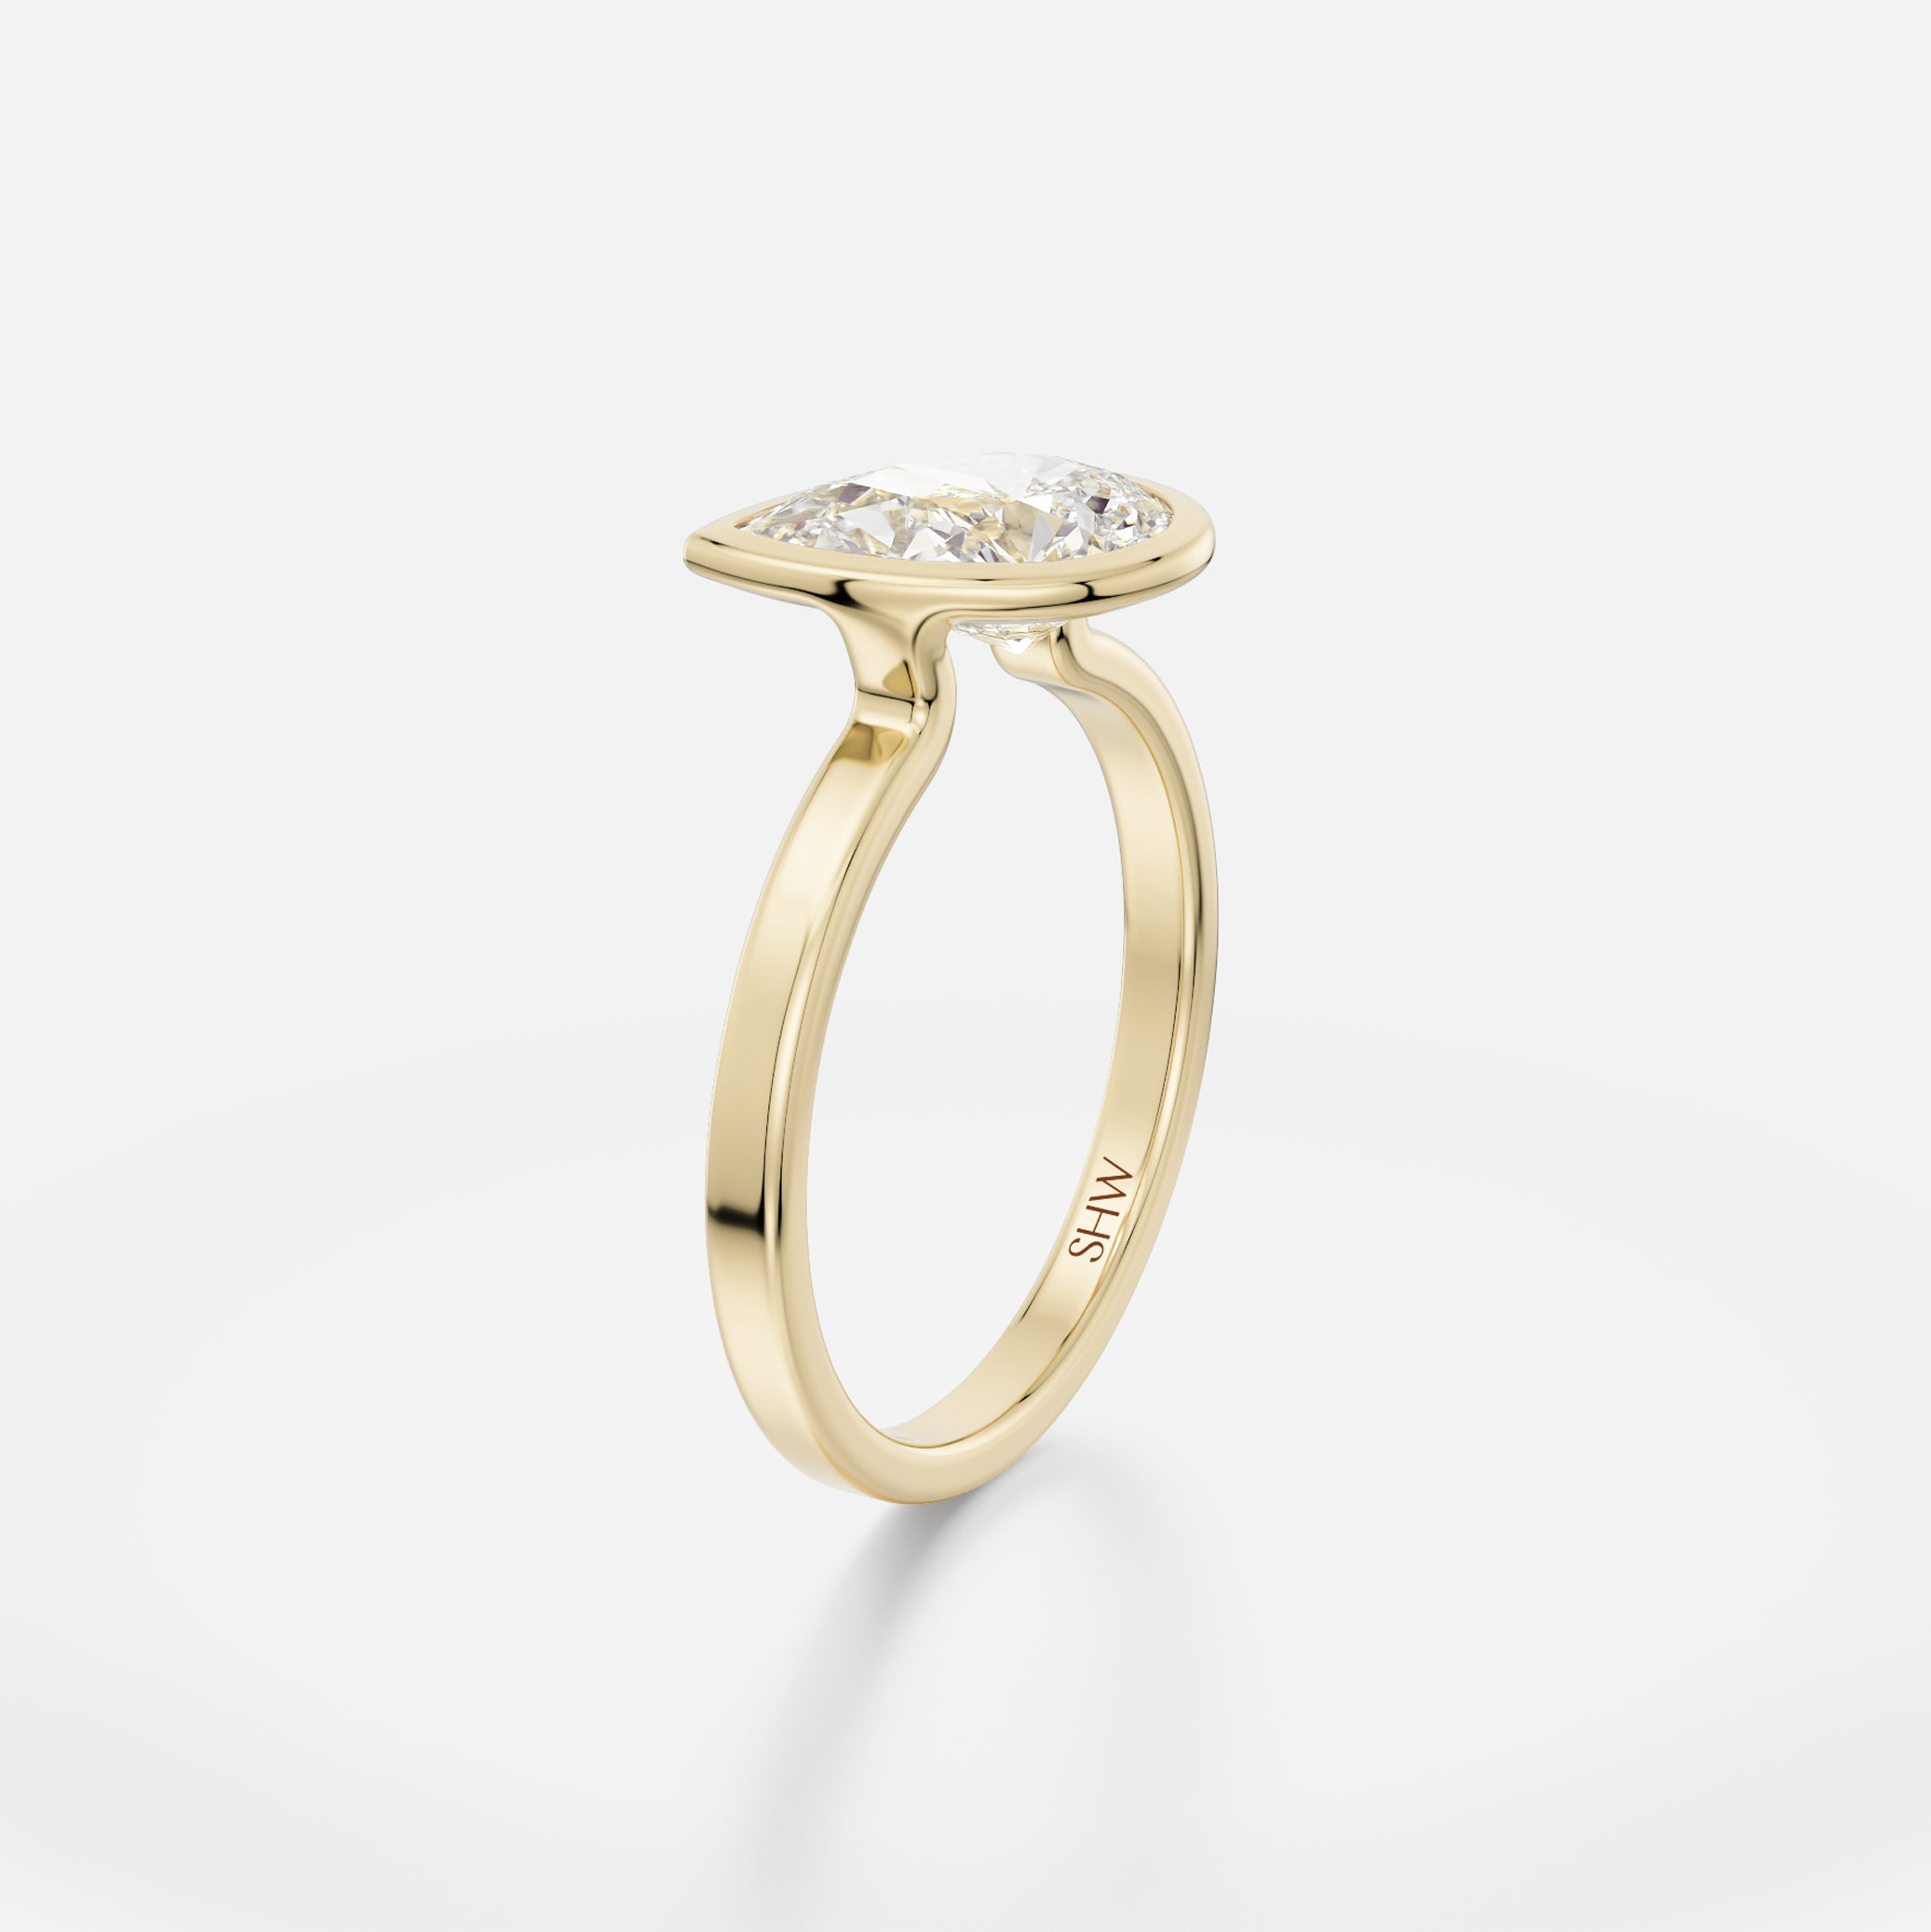 Mana Square Profile with Titled Pair Minimalist Engagement Ring Setting handcrafted by SHW Fine Jewelry New York City